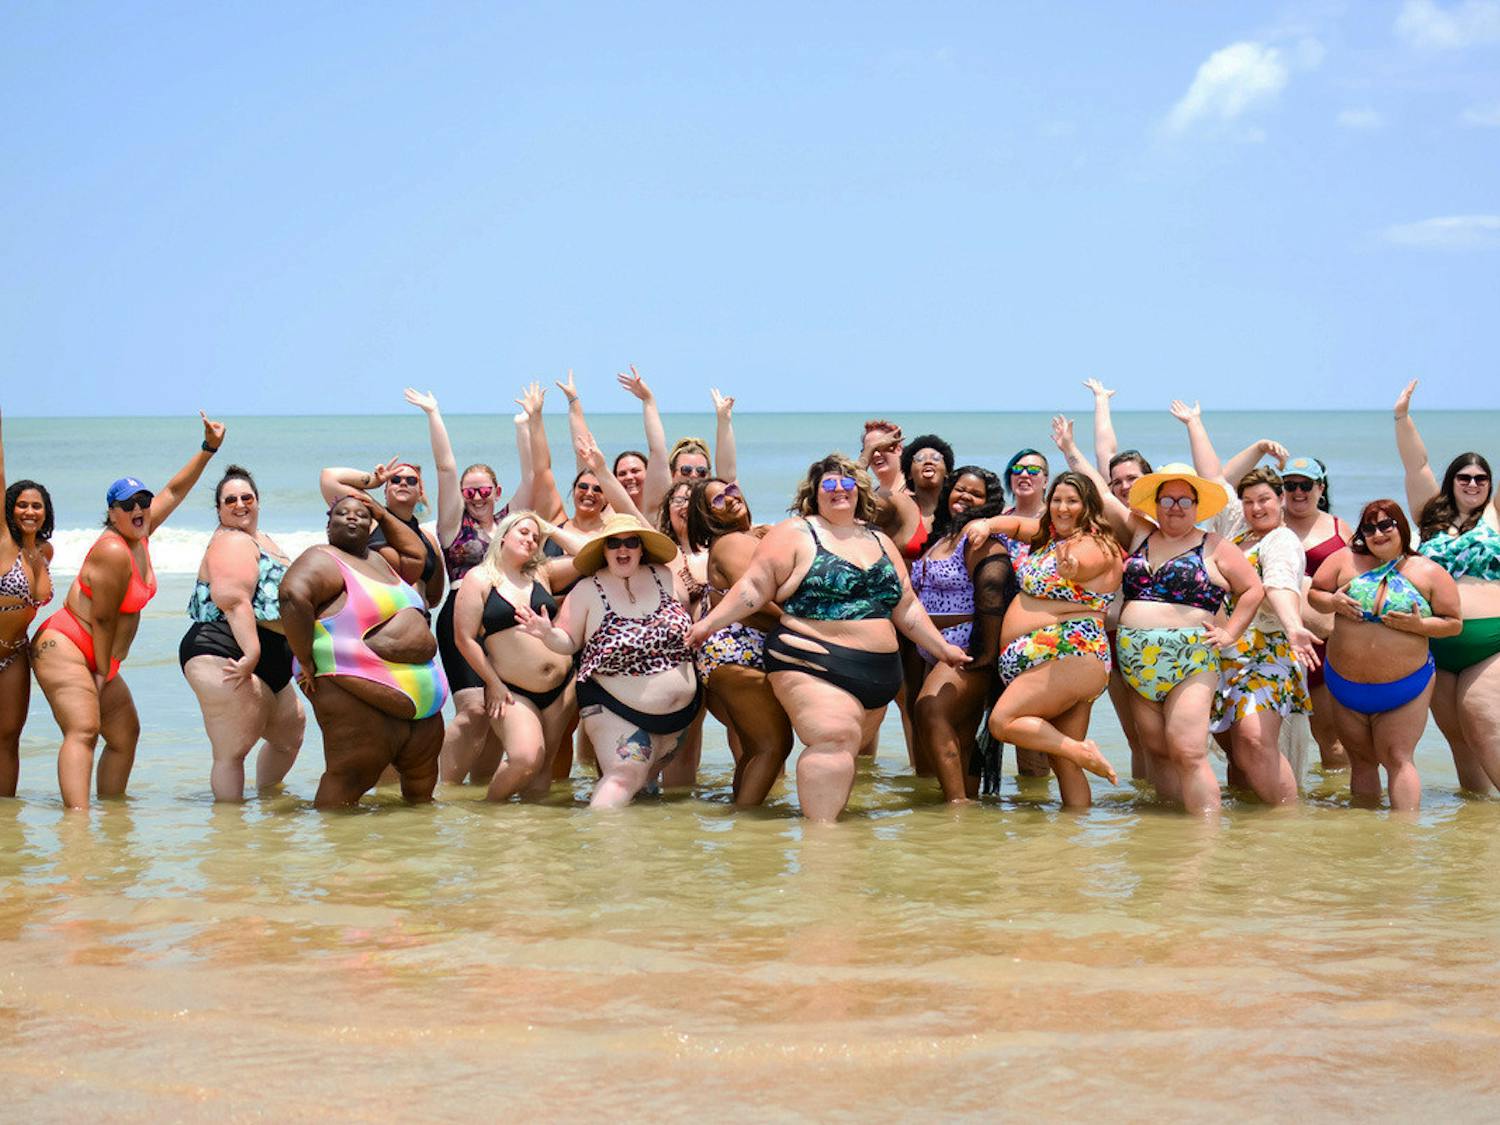 Curvy Confidence members at the Summer Swim Soiree on Saturday, June 12, 2021, at Mickler Landing, Florida. (Photo by Jonathan Vickers | Courtesy to The Alligator)

